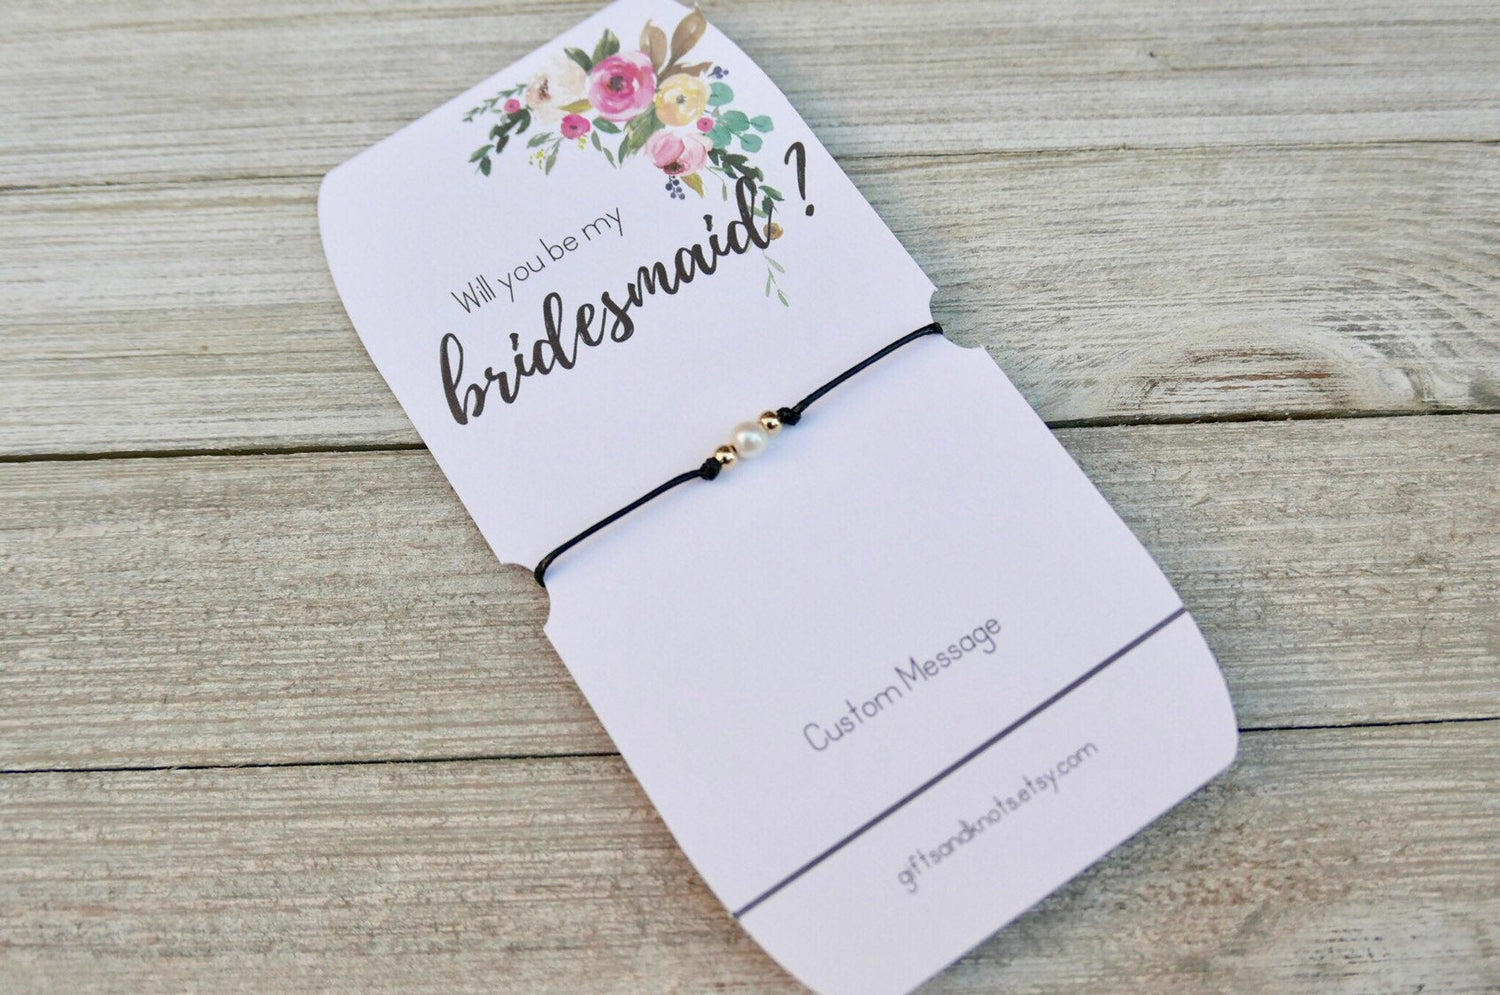 Will You Be My Bridesmaid?, Bridesmaid Bracelet Favors - Gifts&Knots